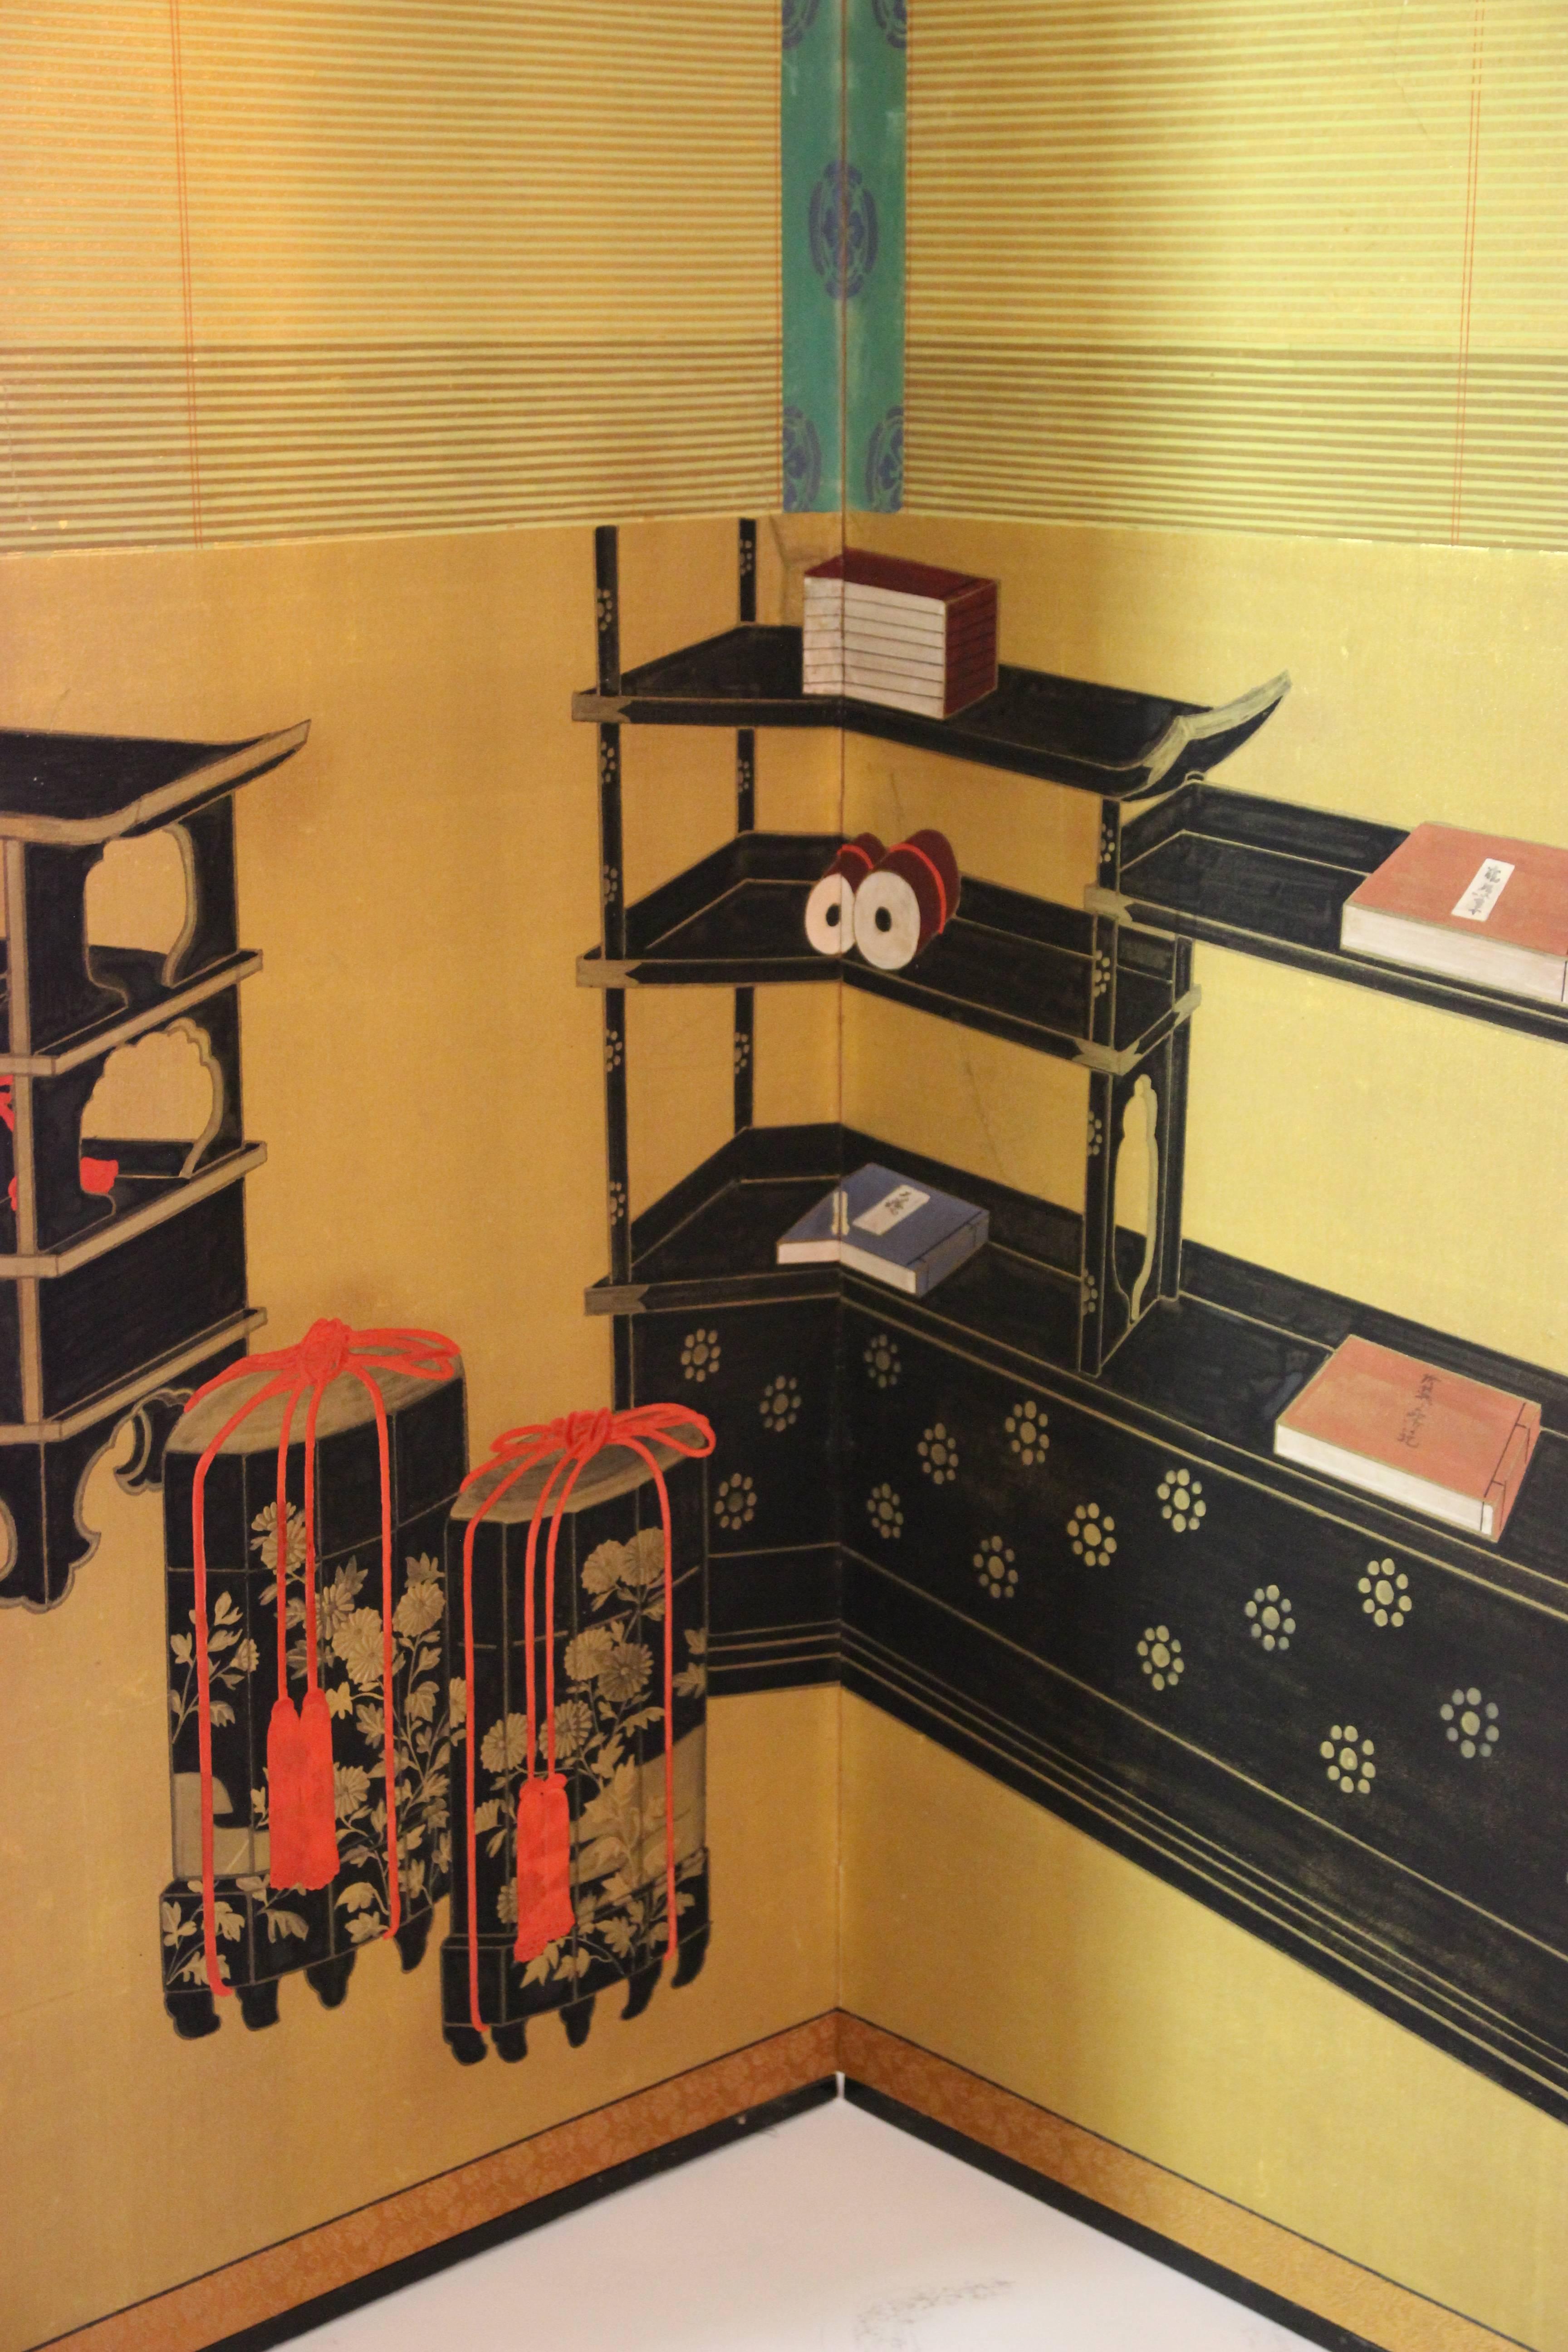 Screen, four panels,
lacquered wood, gouache, ink on paper,
circa 1930, Japan.
Height: 1m20, width: 1m55, depth: 2 cm.